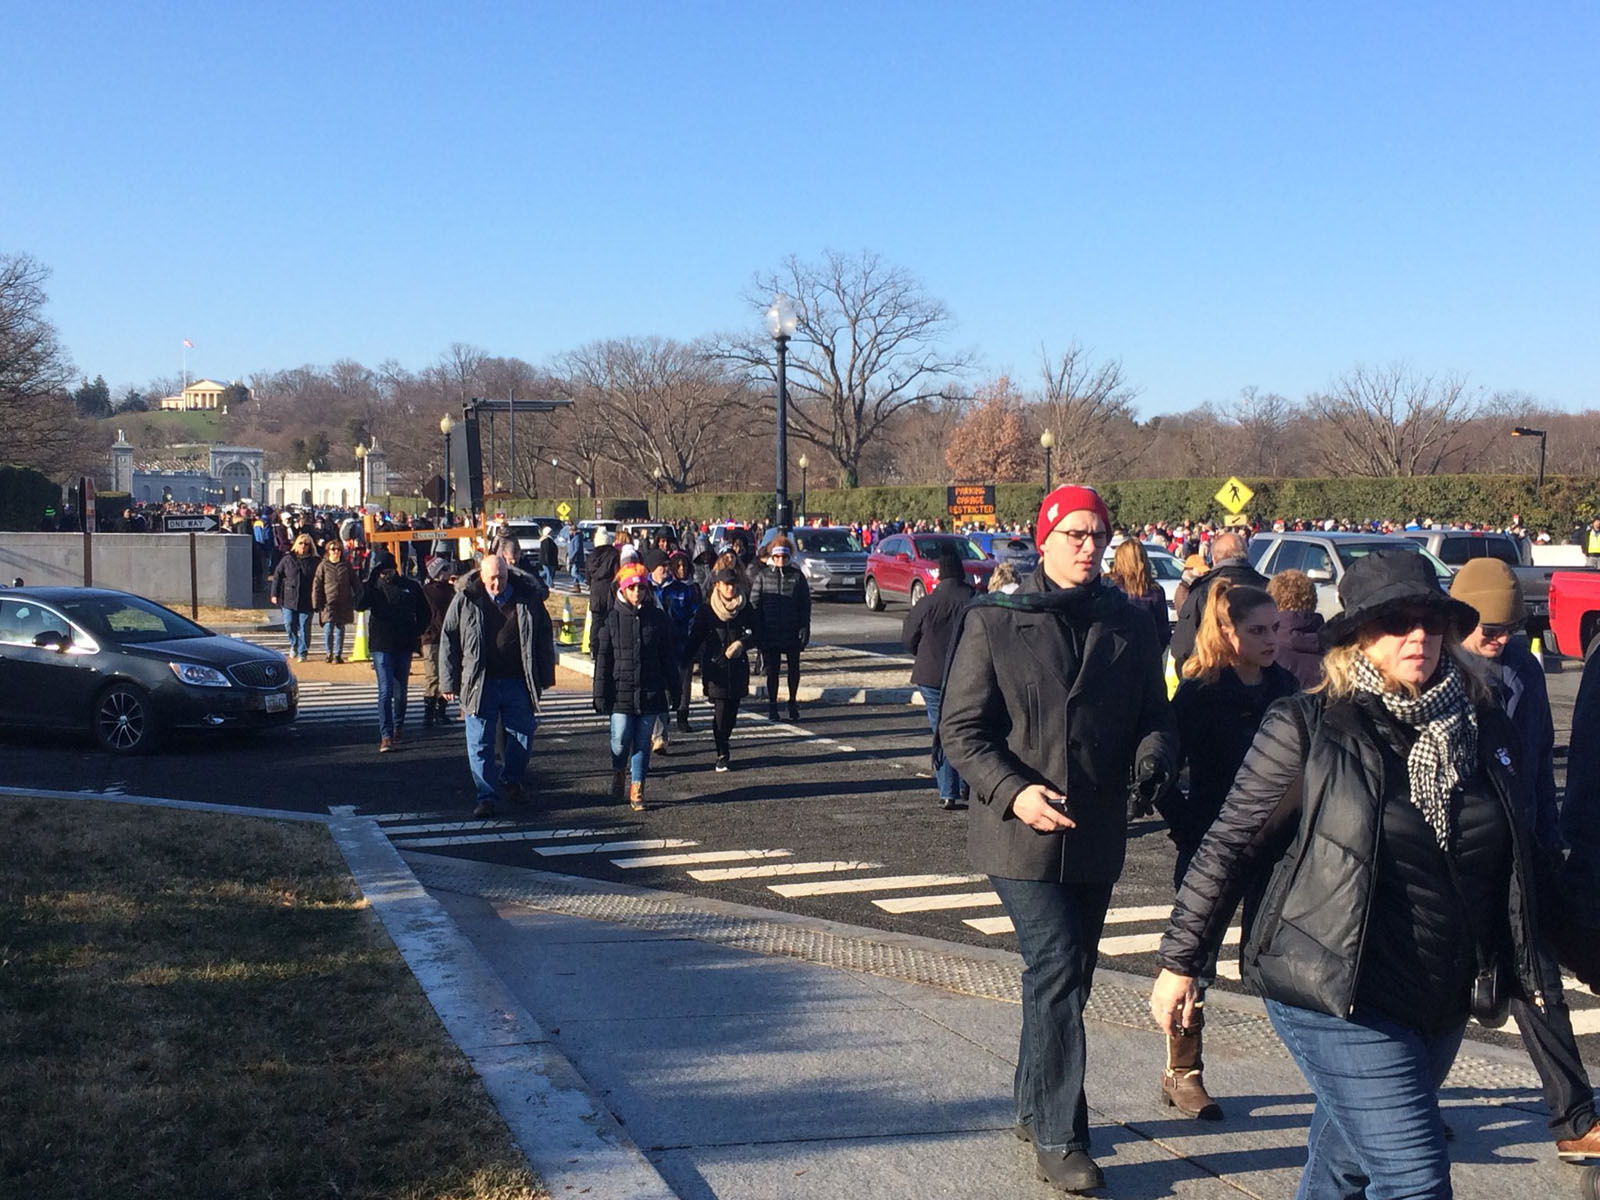 The weather was chilly but that didn't stop huge crowds from heading to Arlington National Cemetery to help out with the annual wreath laying Saturday. (WTOP/Nick Iannelli)